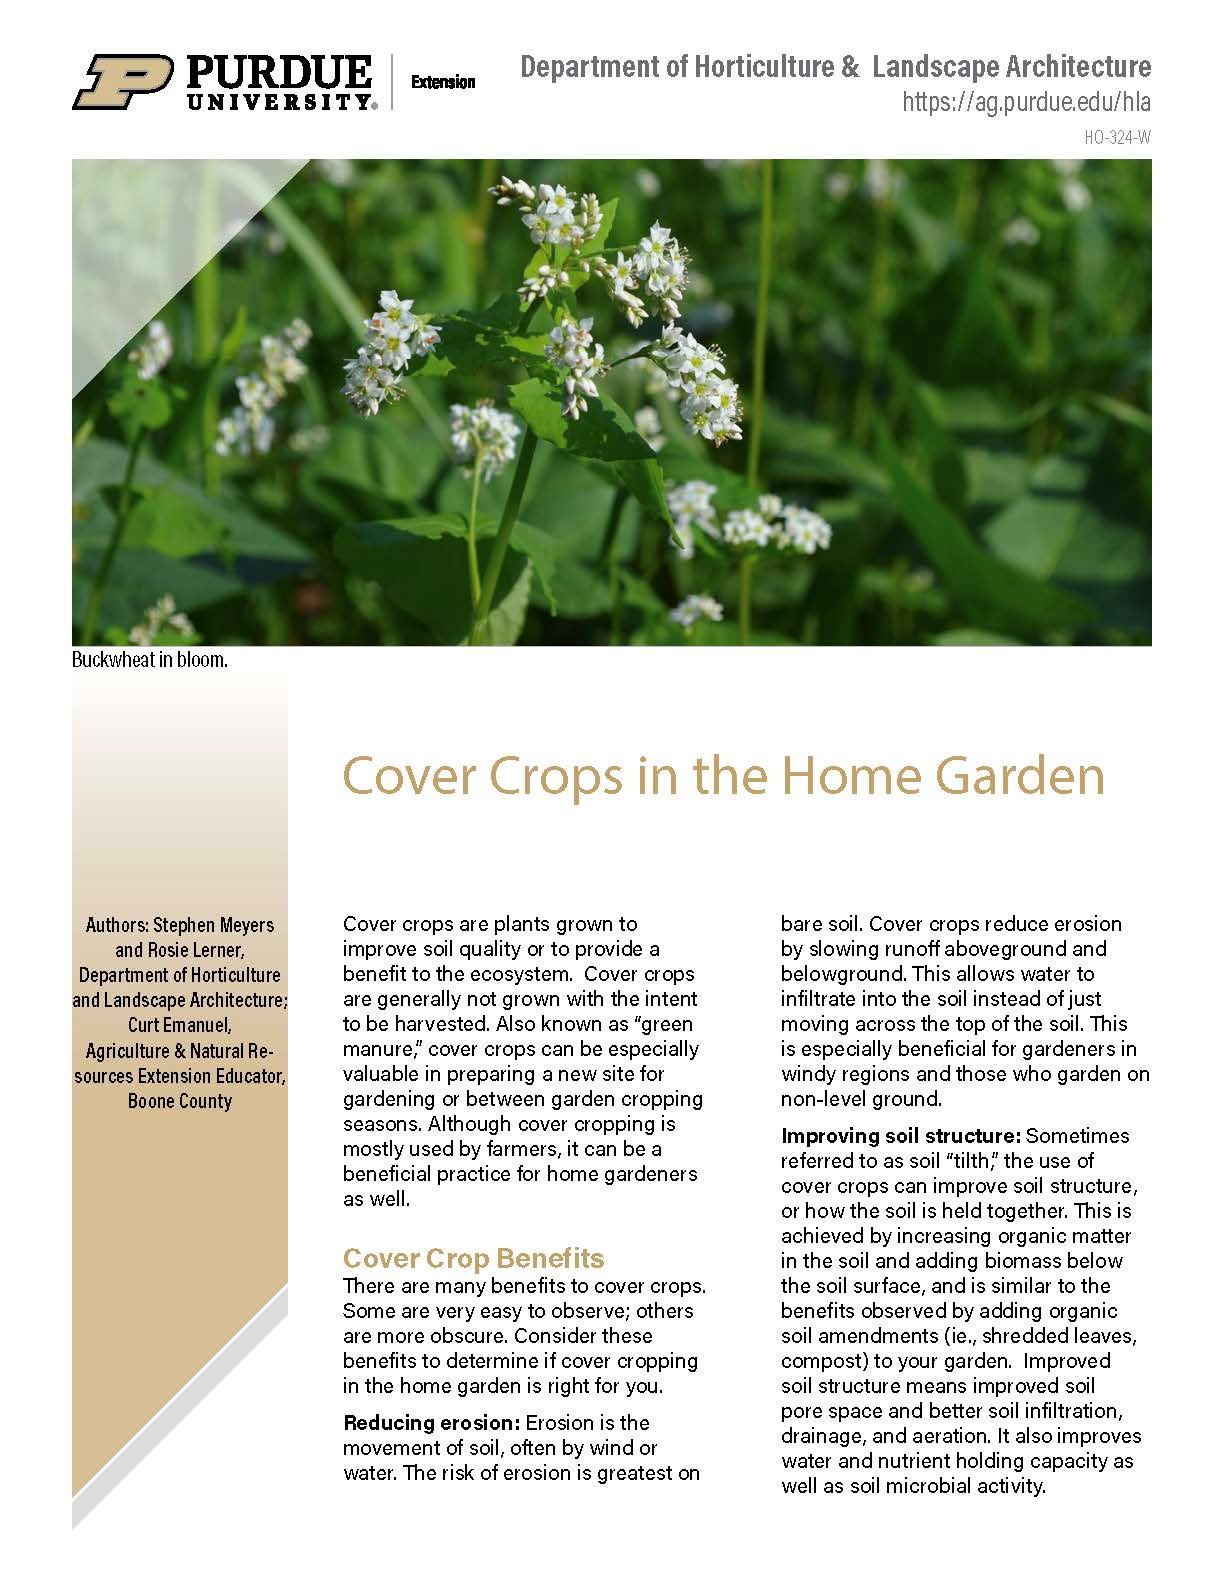 Cover crops in the home garden